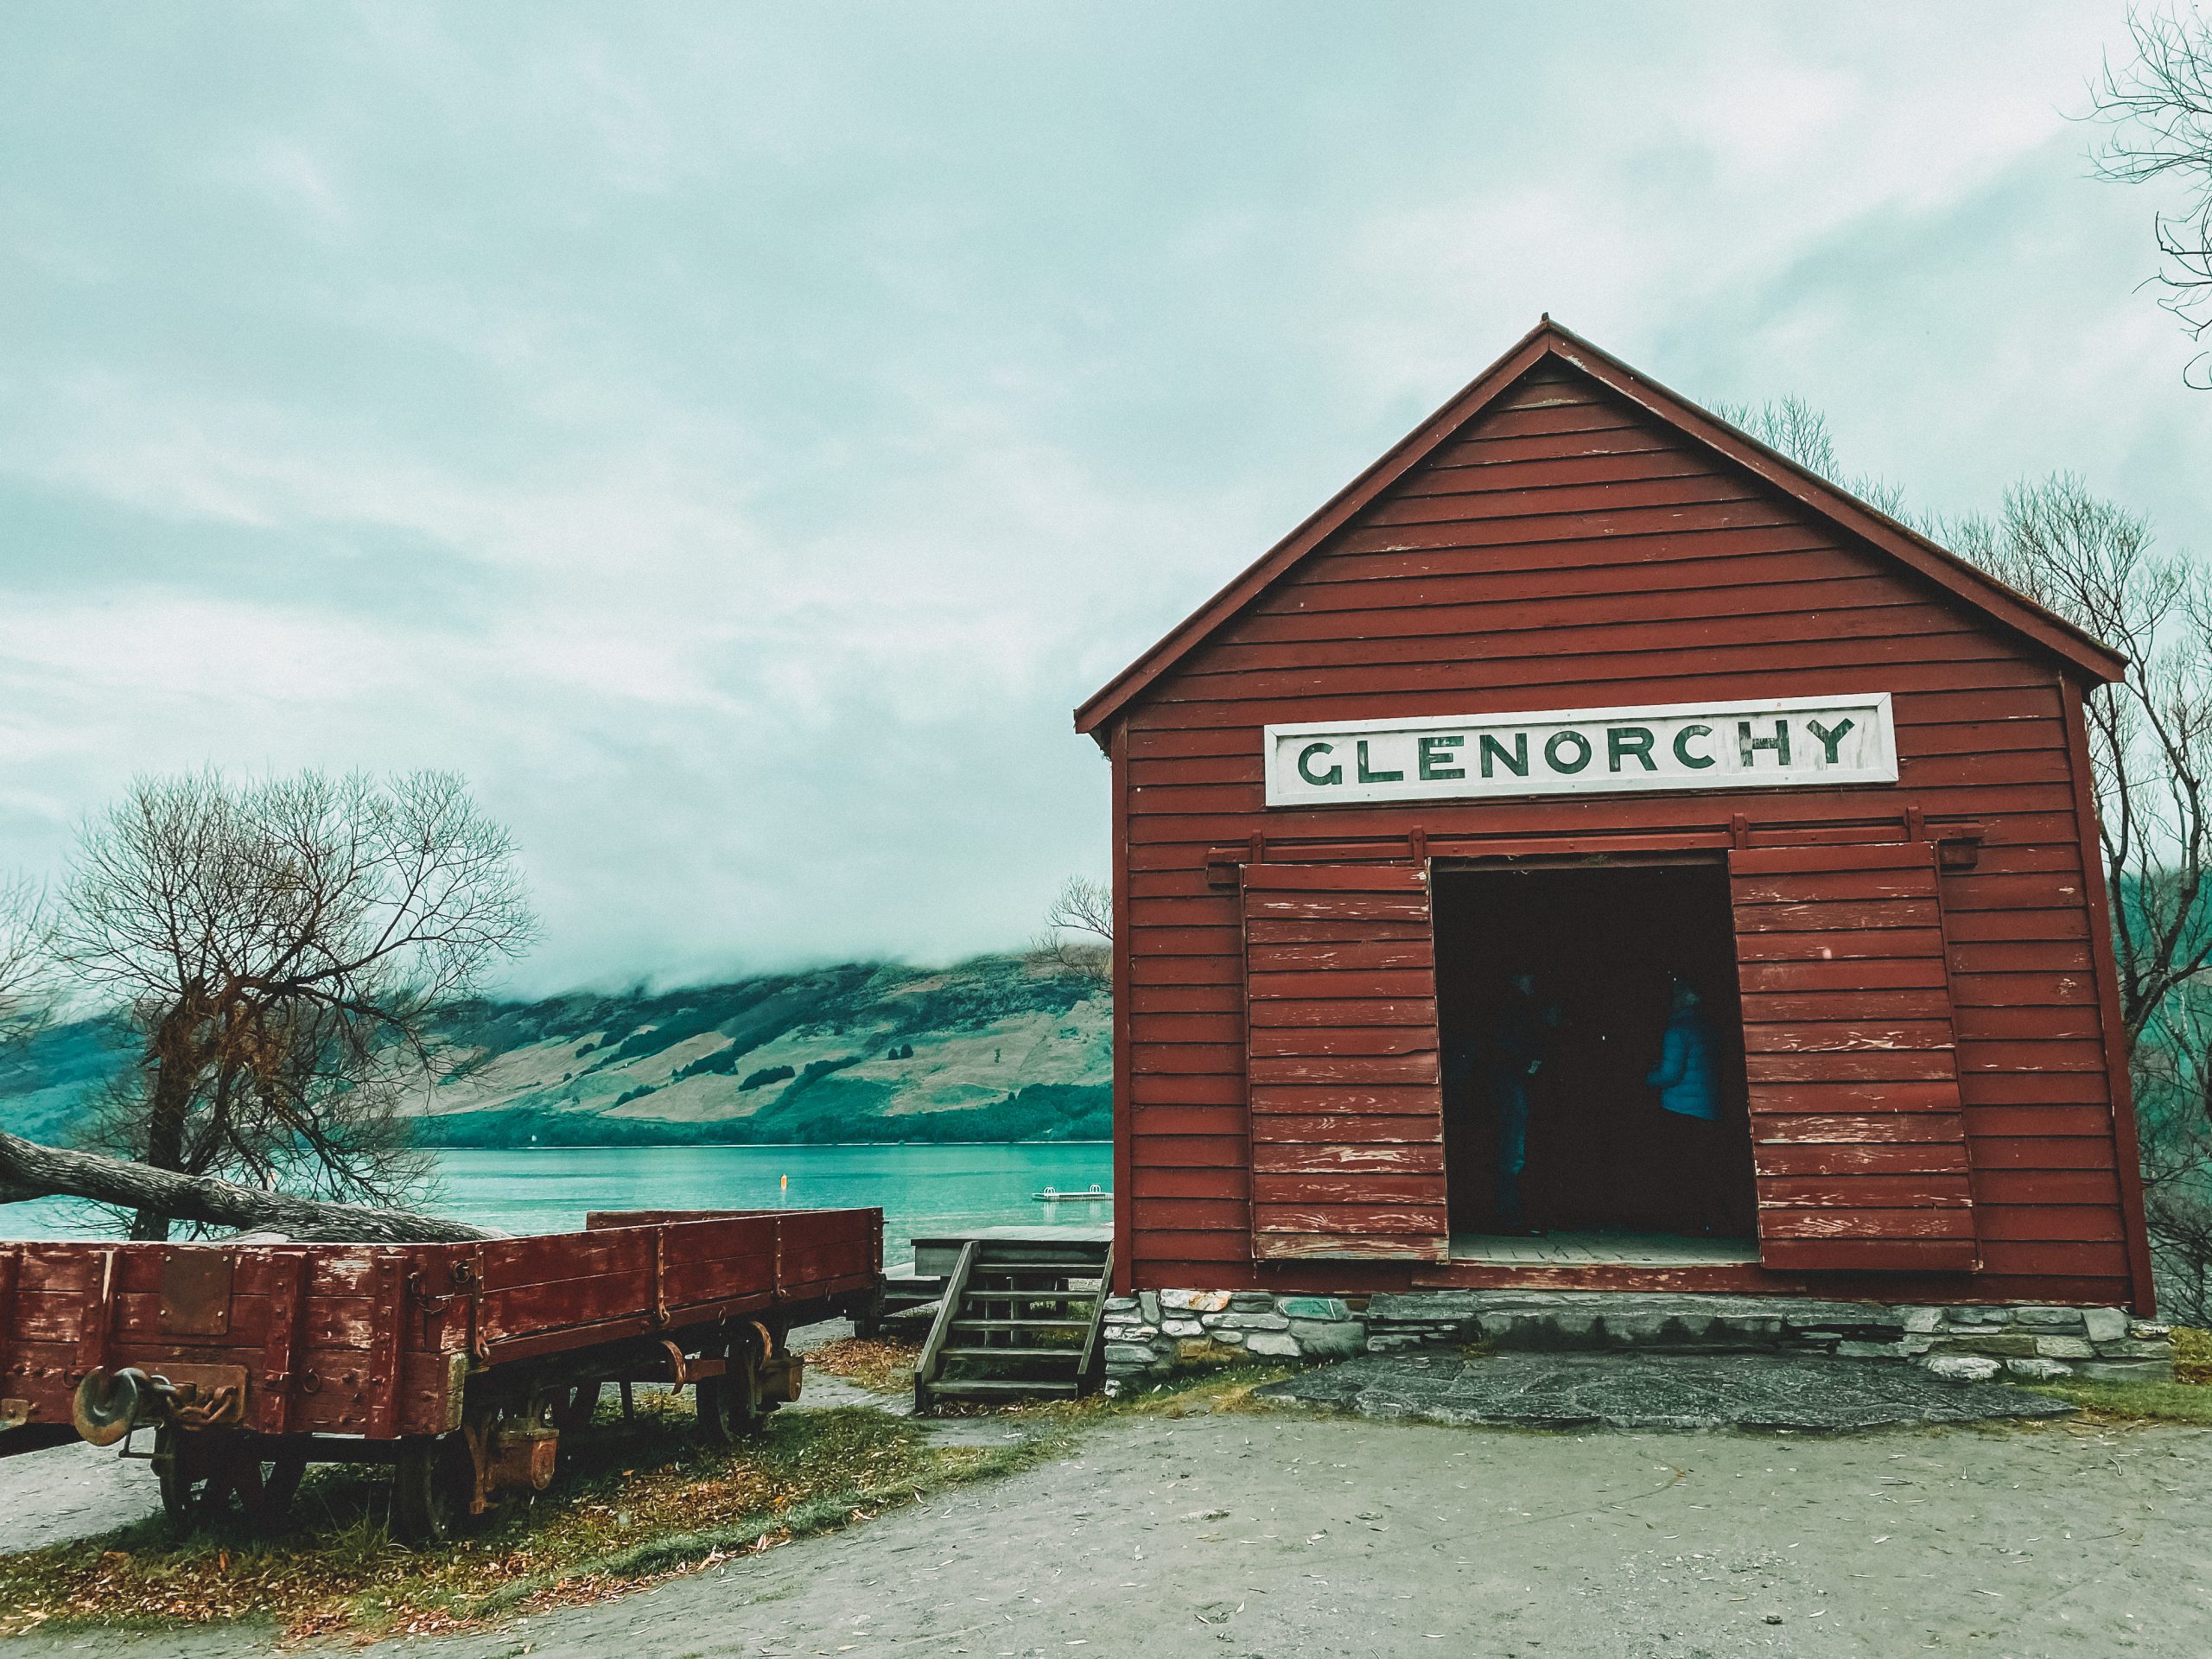 An old red boat hut with a white sign reading 'GLENORCHY' at the top and an old red carriage to the left, in front of a lake and mountains covered in fog.